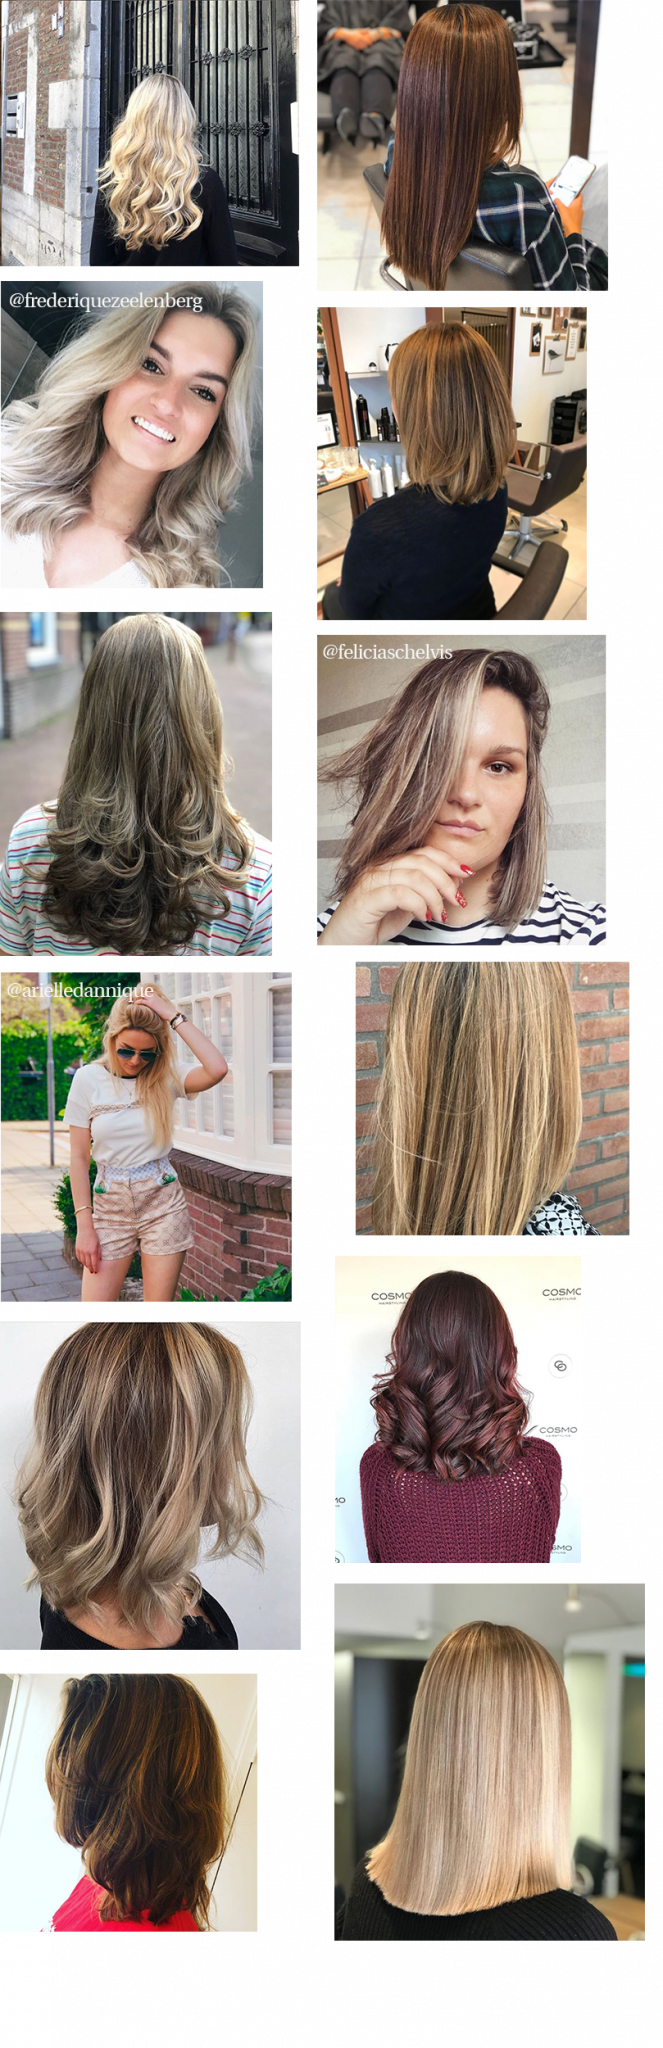 zomerlooks met highlights - Cosmo Hairstyling